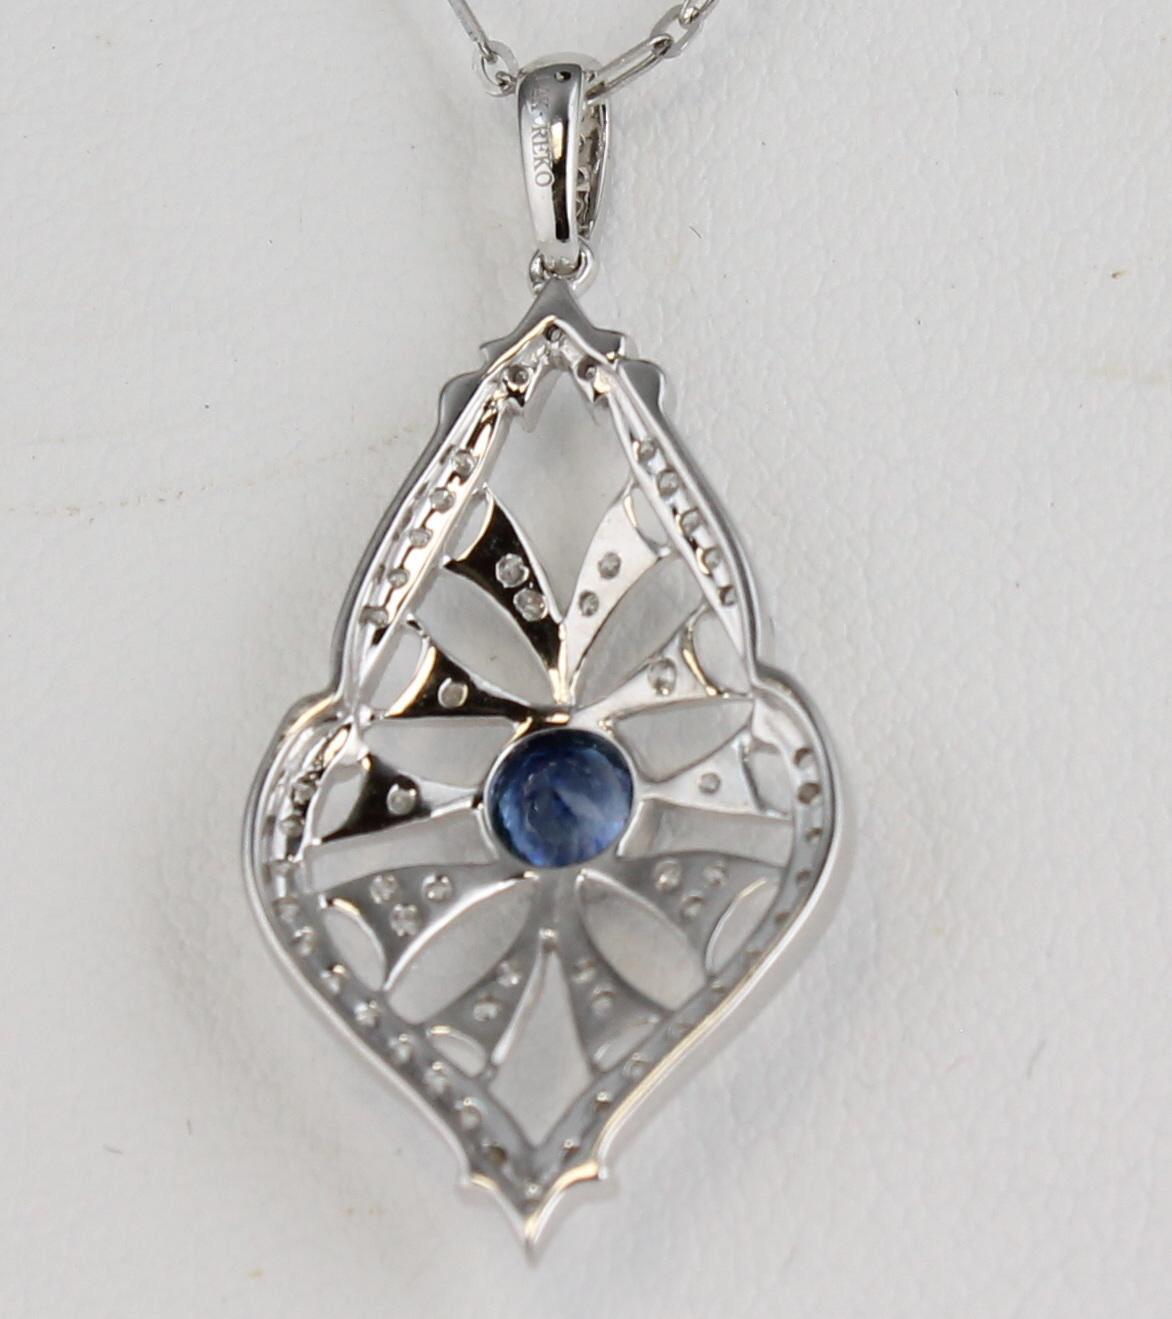 Lovely 14 karat white gold filagree showcases the beautiful .30 carat sapphire in the center.  There are .33 carat total weight in the filagree mounting and the bail that provide plenty of sparkle.  The pendant is .63 inch wide and 18 inches long